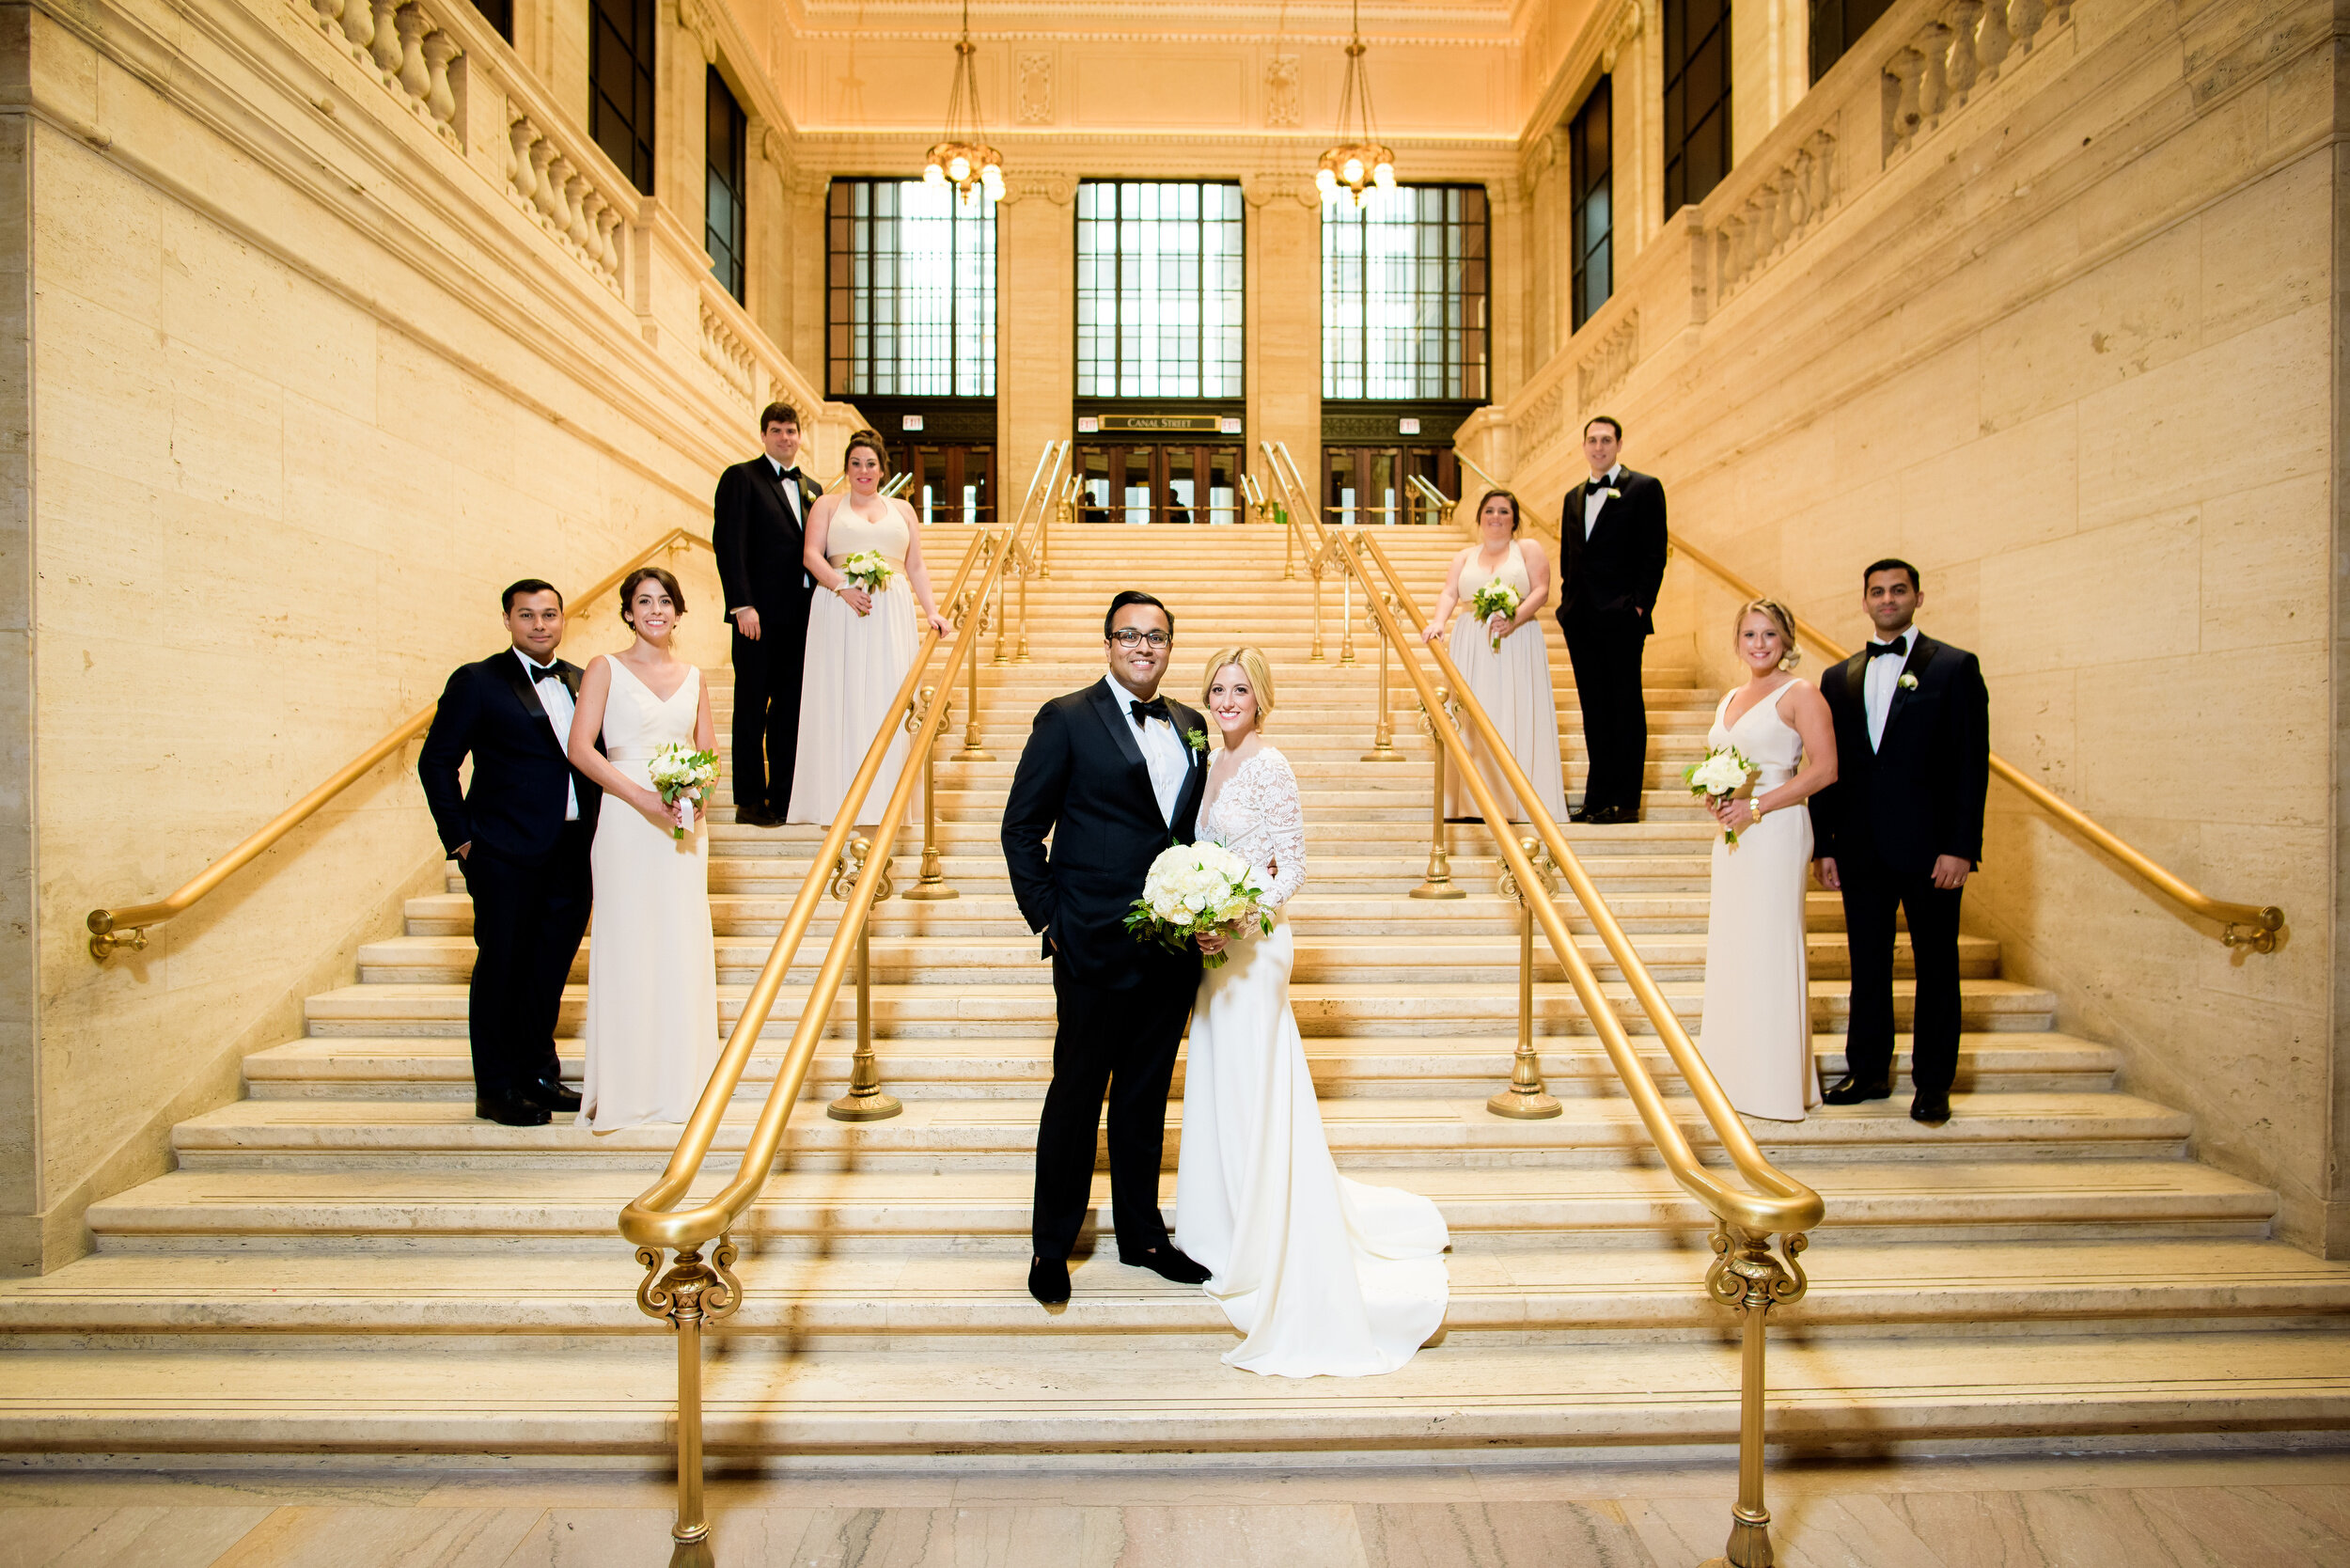 Wedding party portrait on grand staircase at Chicago Union Station: Geraghty Chicago wedding photography captured by J. Brown Photography.